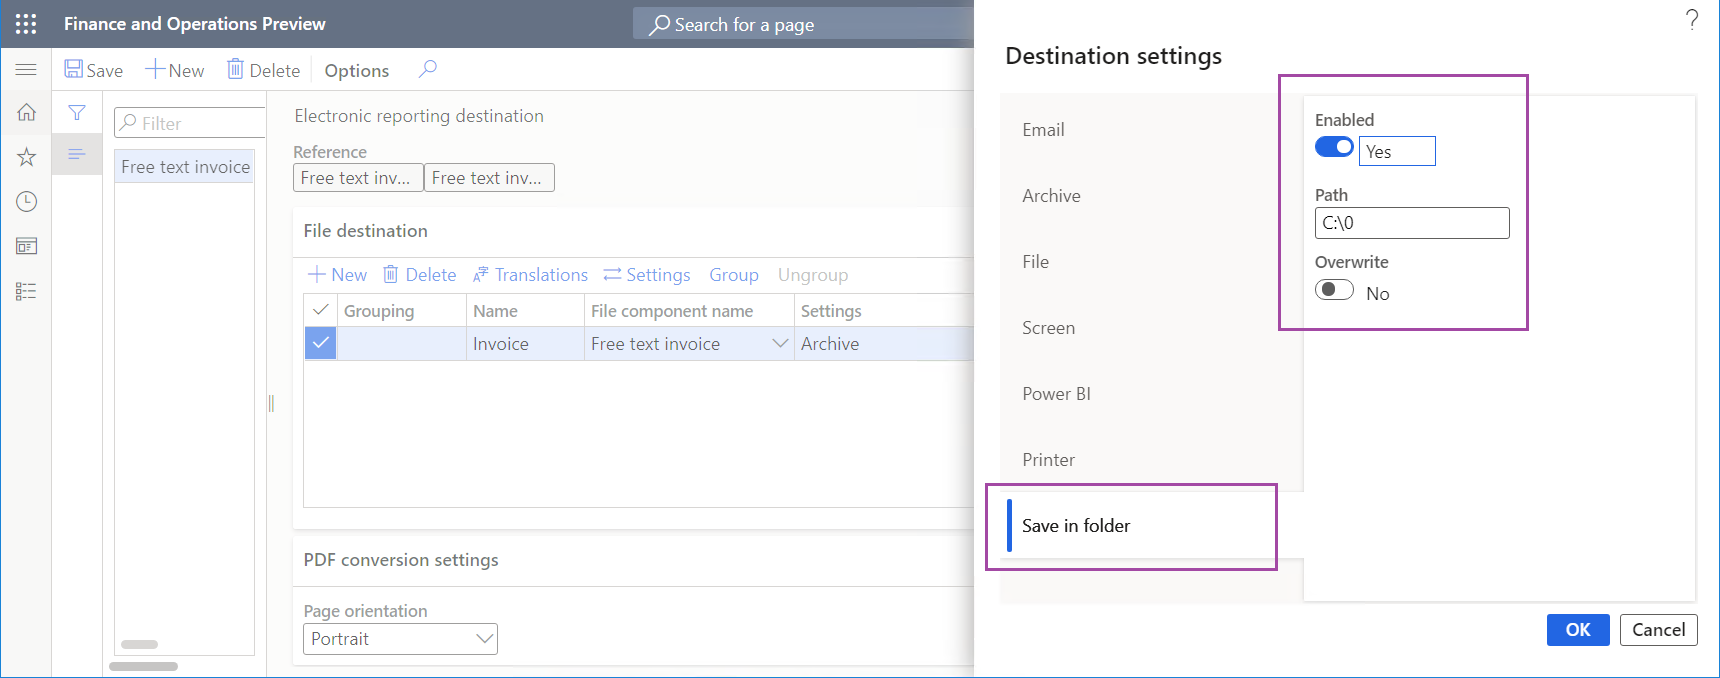 Configuring the Save in folder destination in the Destination settings dialog box.